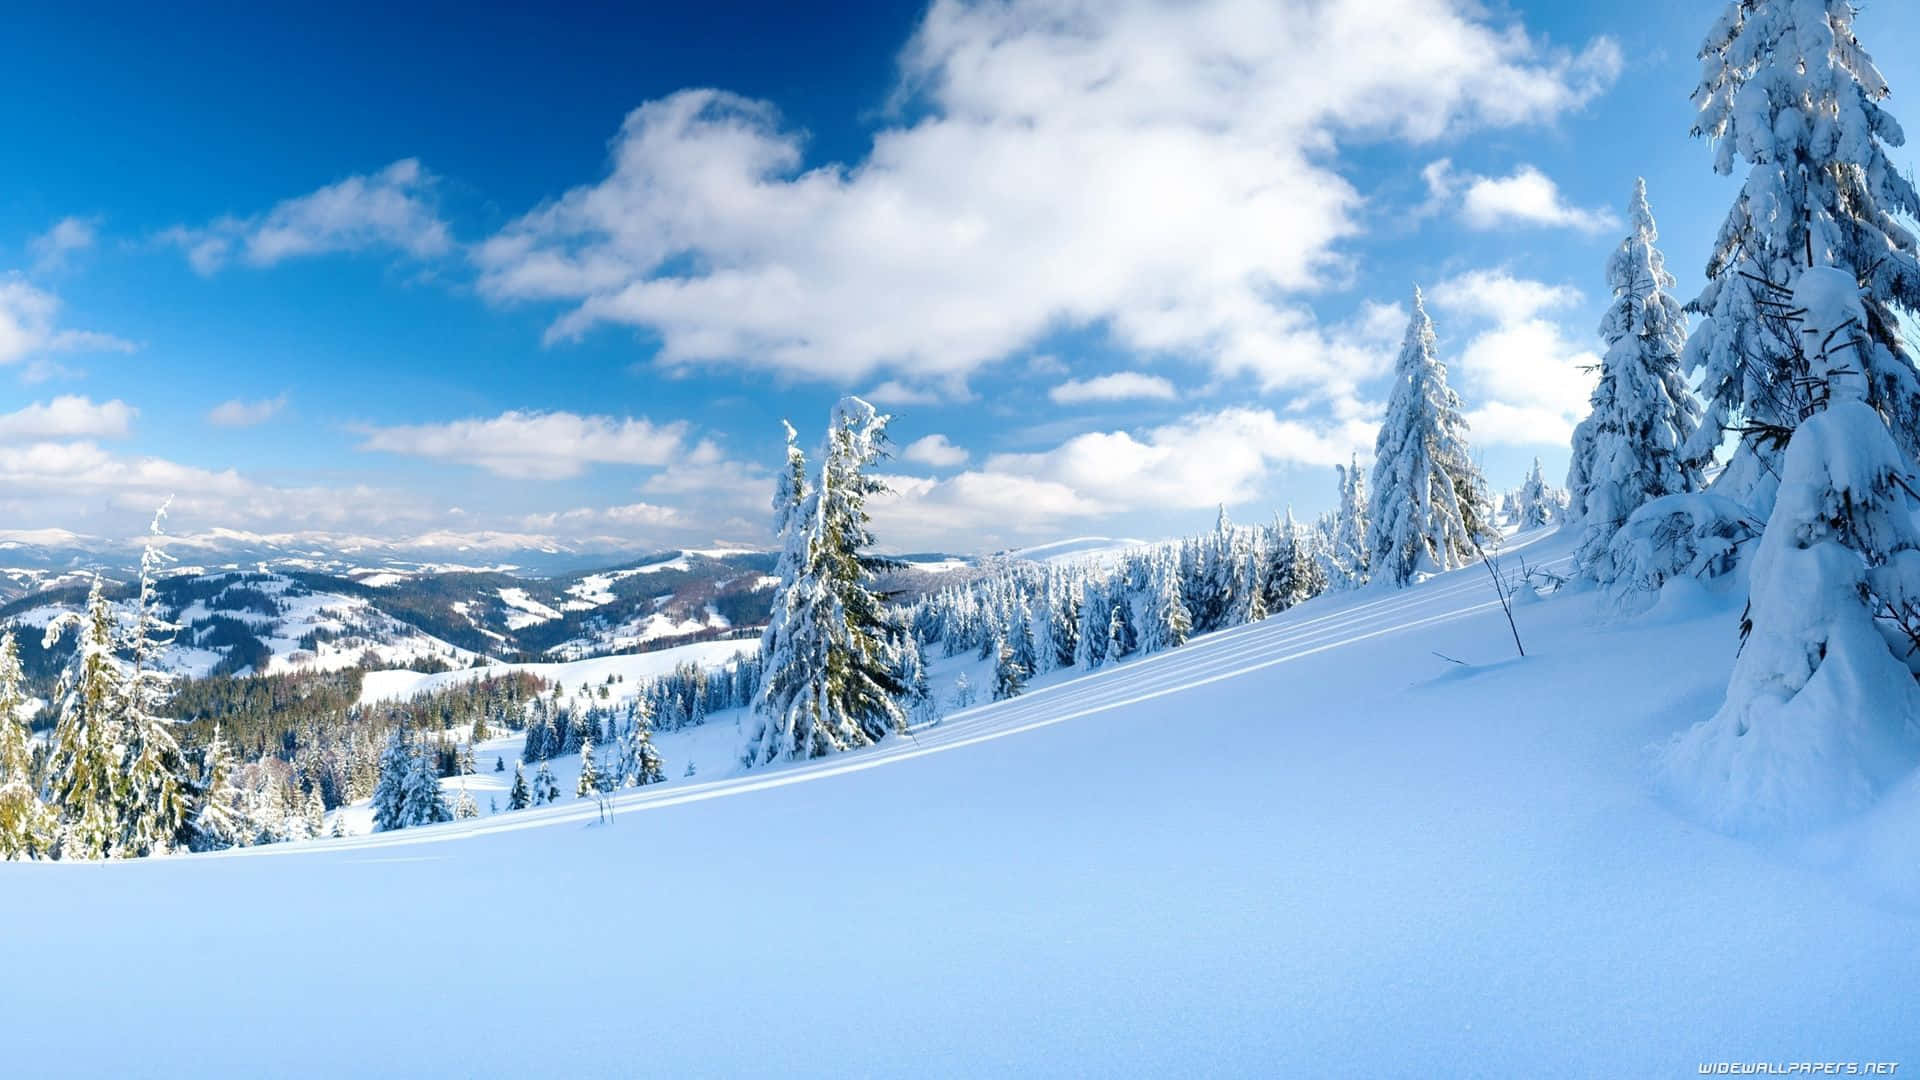 Enjoy the peaceful beauty of a natural winter landscape